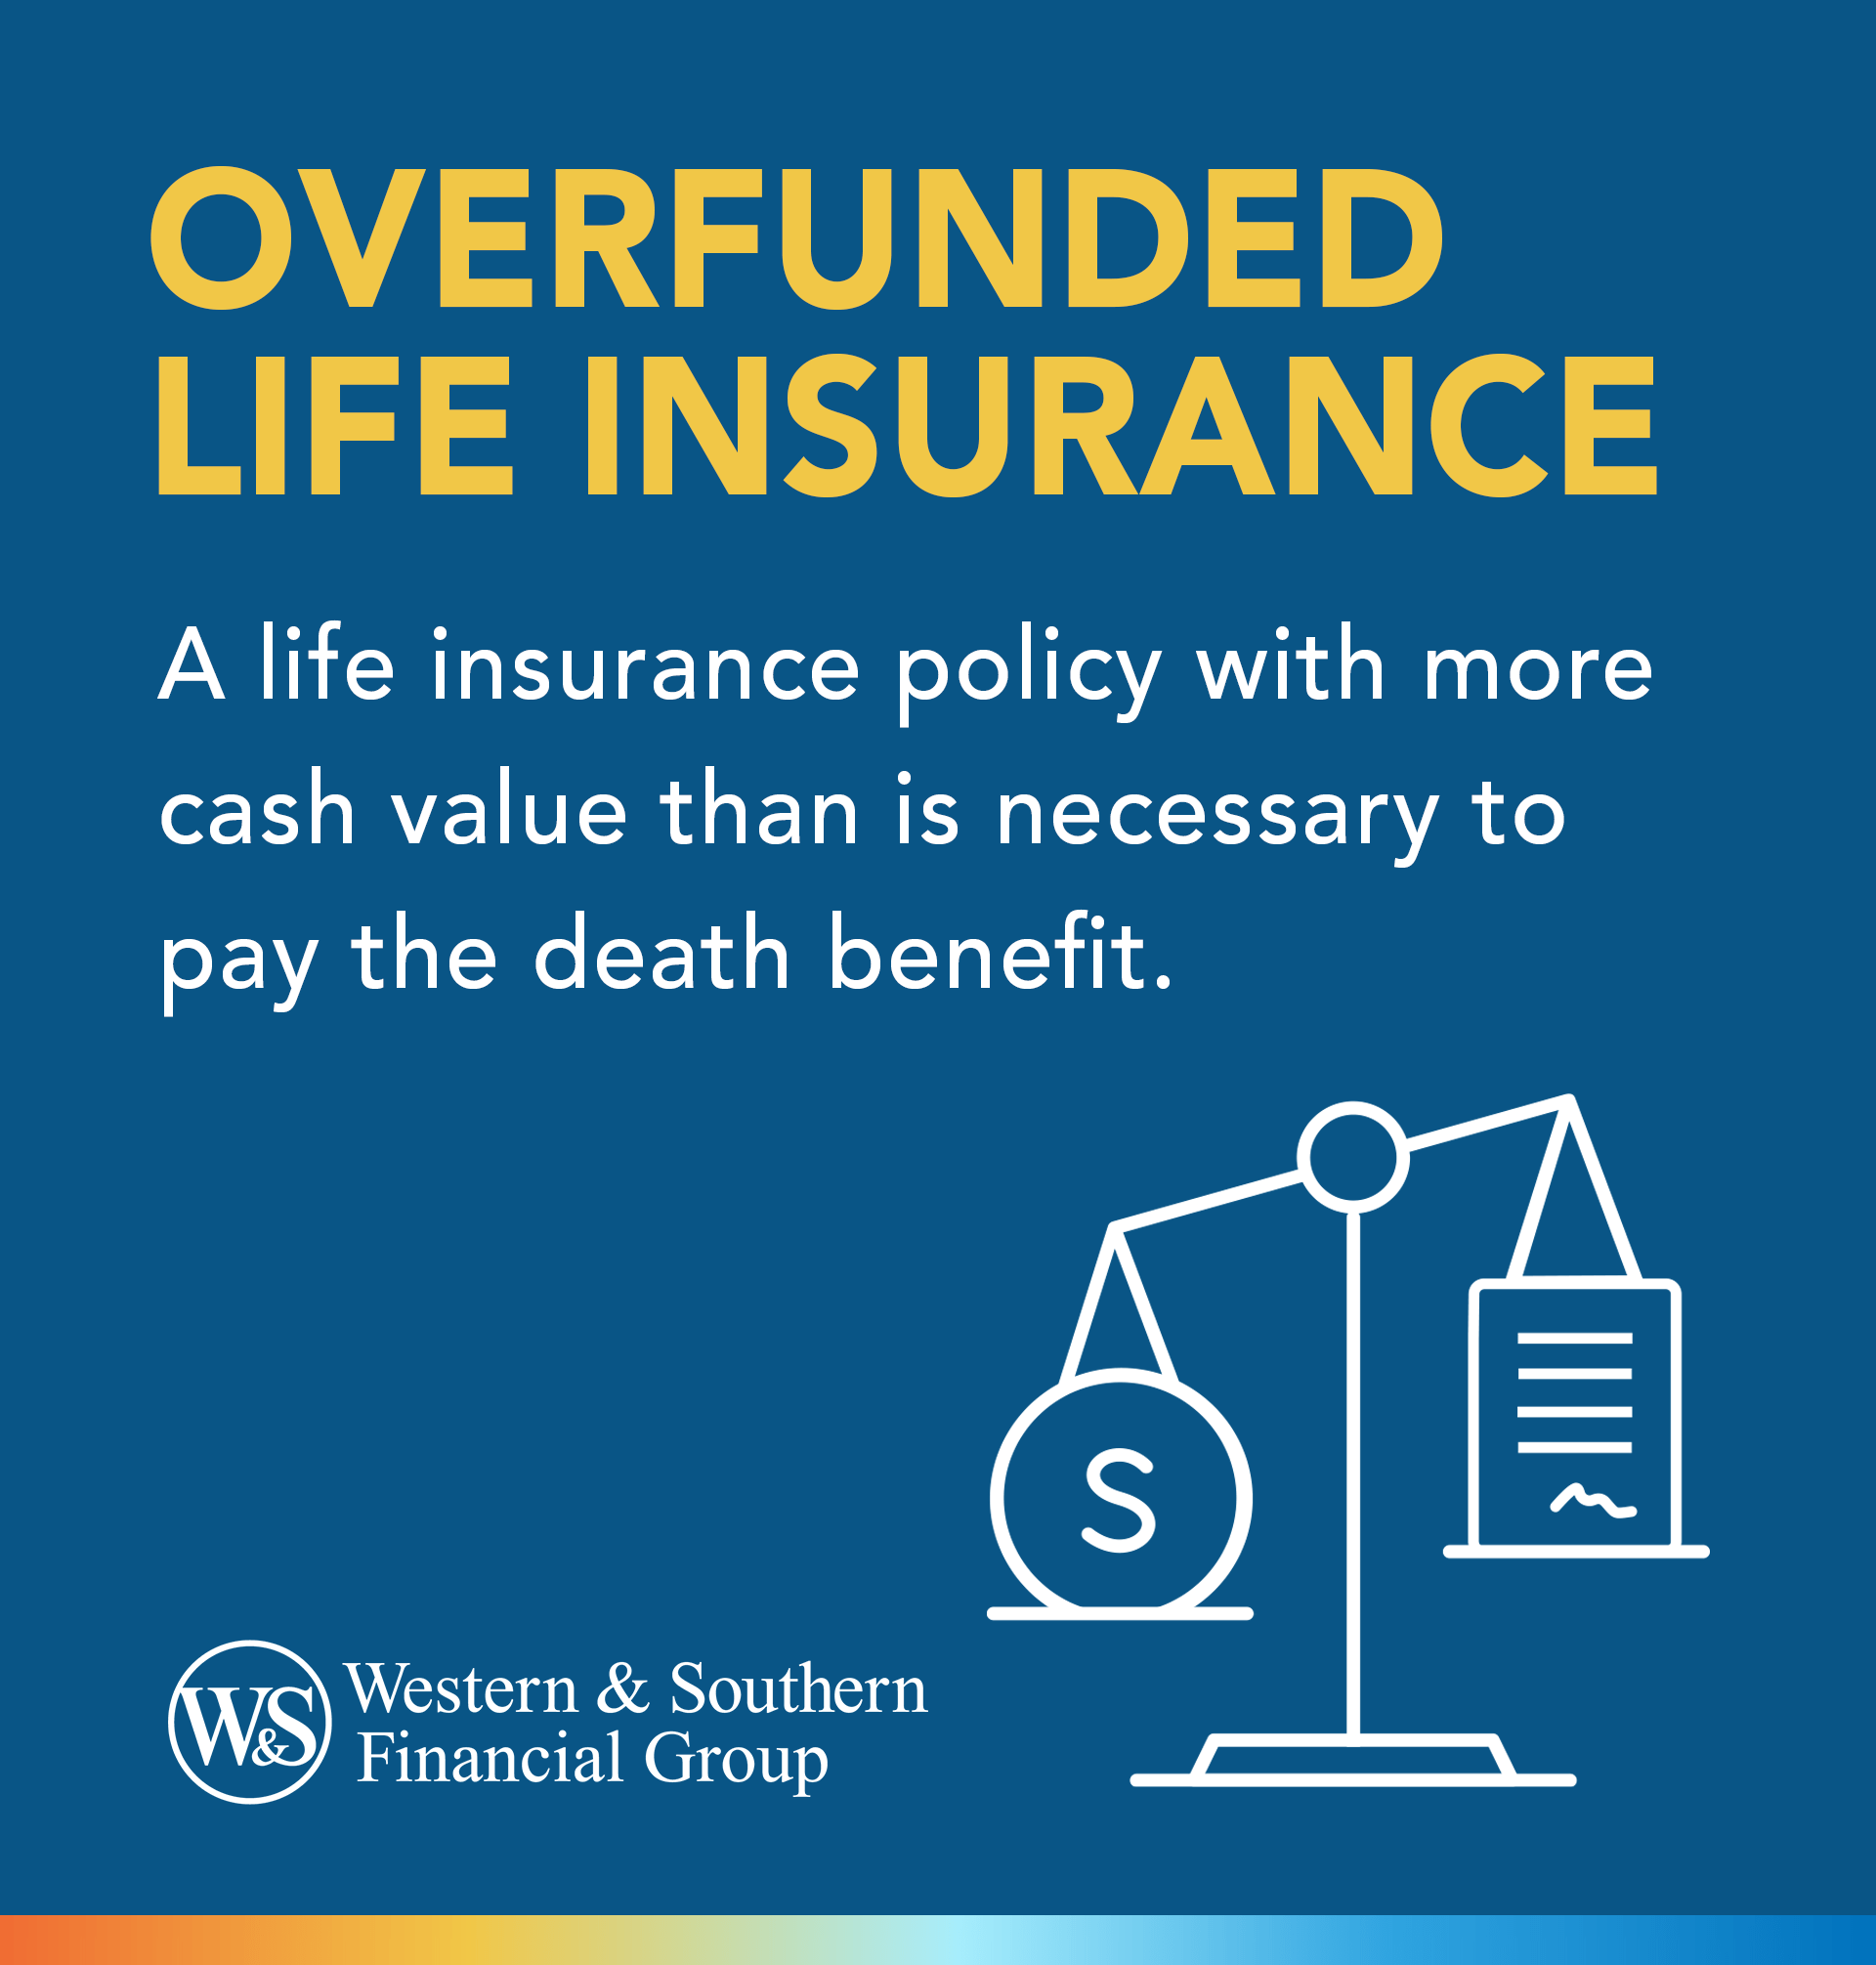 Overfunded Life Insurance Definition